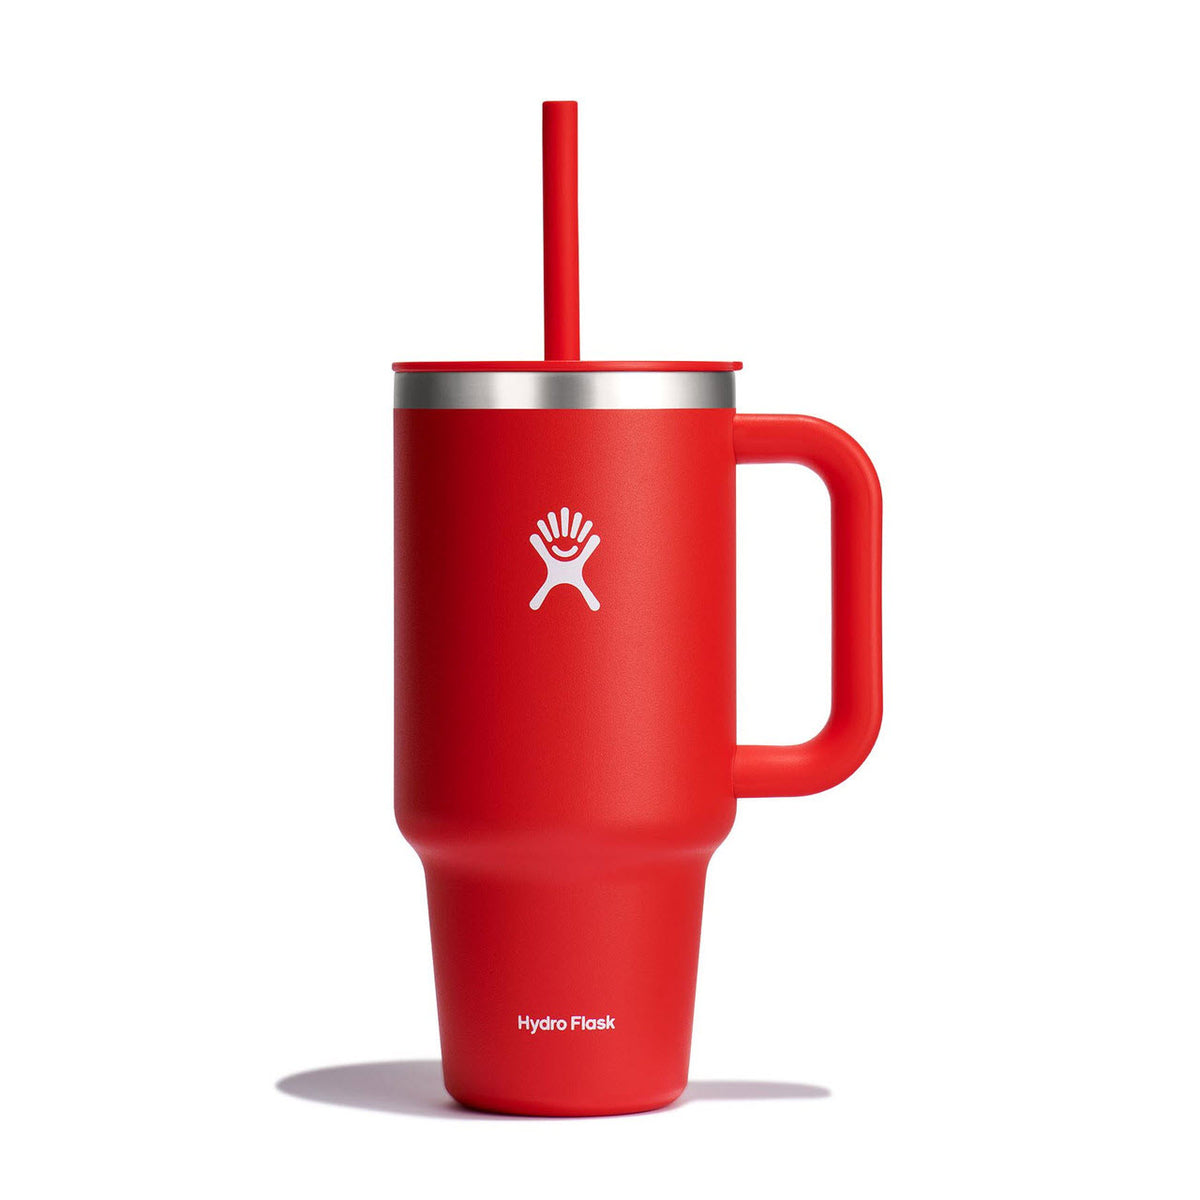 Hydro Flask Travel Tumbler 32oz Goji with a lid and flexible straw, featuring a white logo, isolated on a white background.